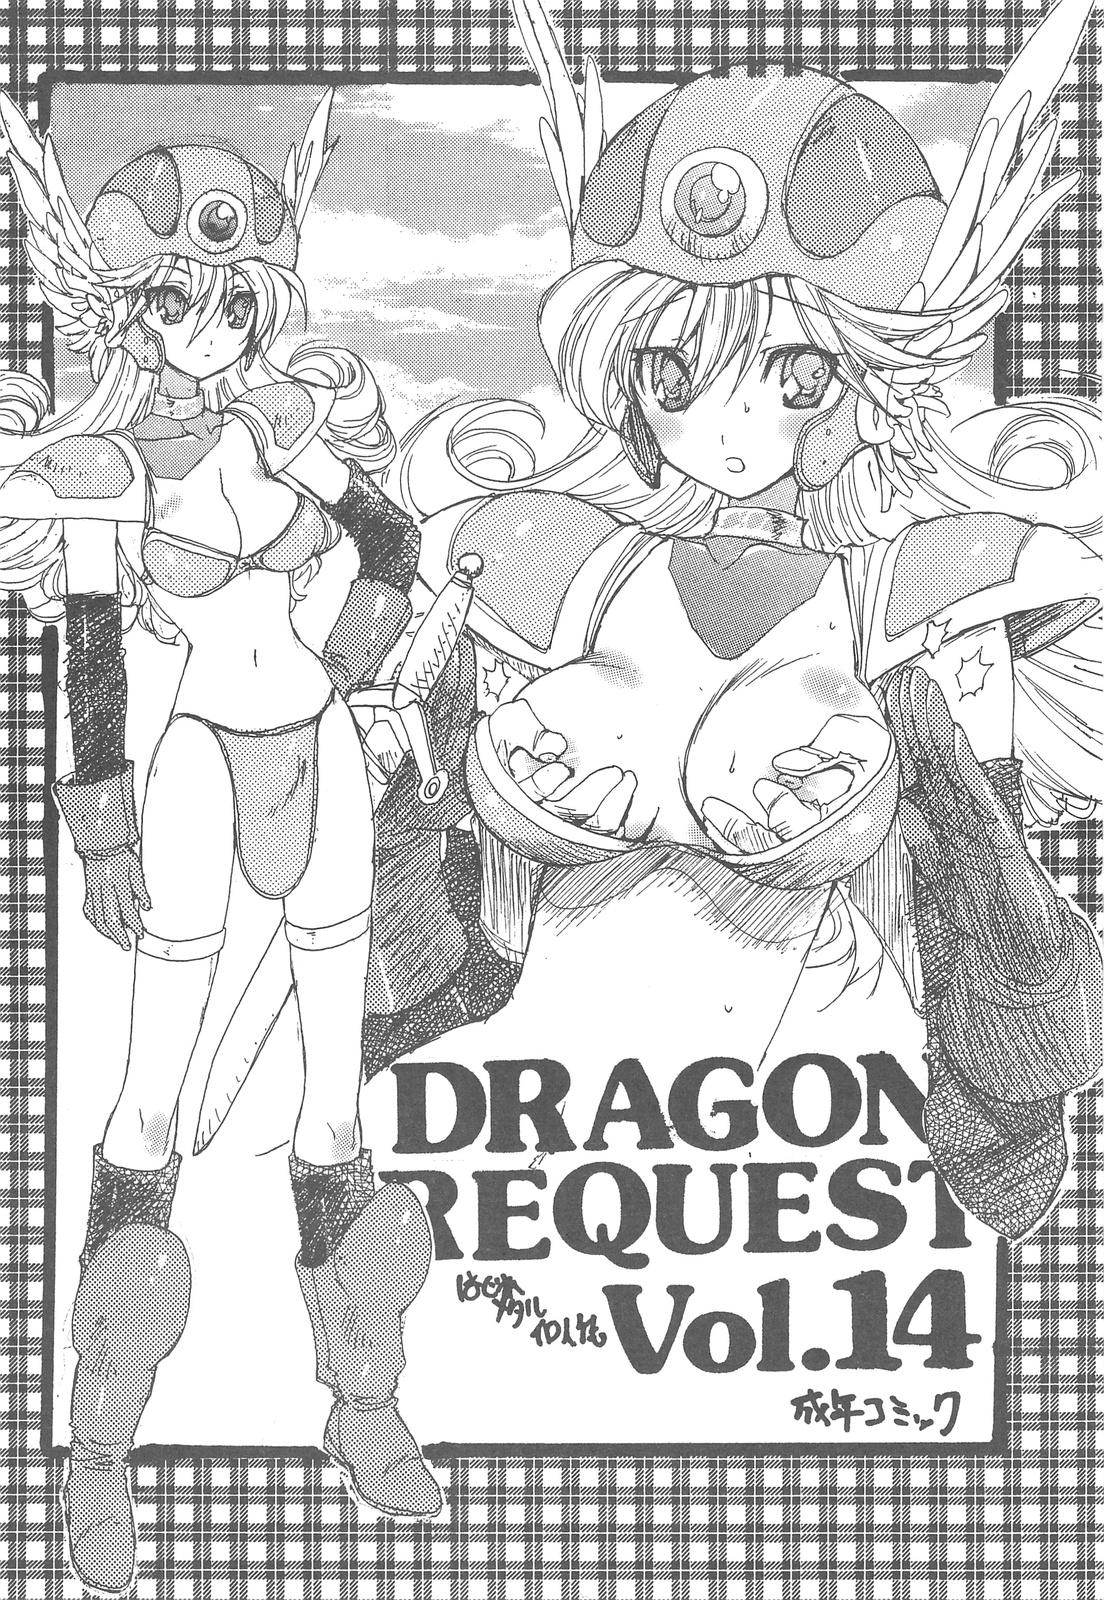 Family DRAGON REQUEST Vol.14 - Dragon quest iii Tiny Titties - Picture 2